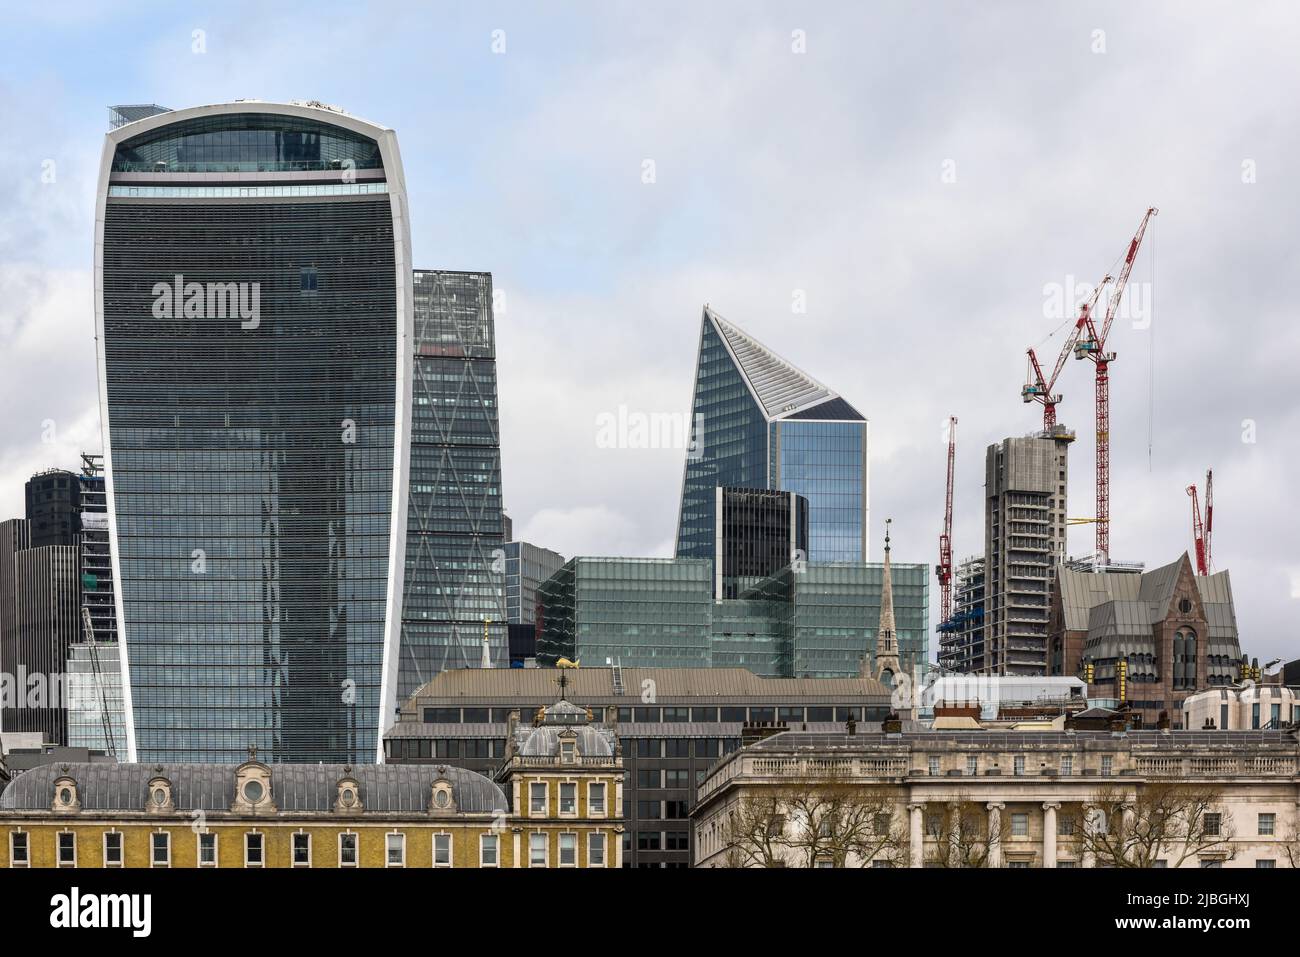 New buildings rise up behind traditional architecture in London city skyline Stock Photo